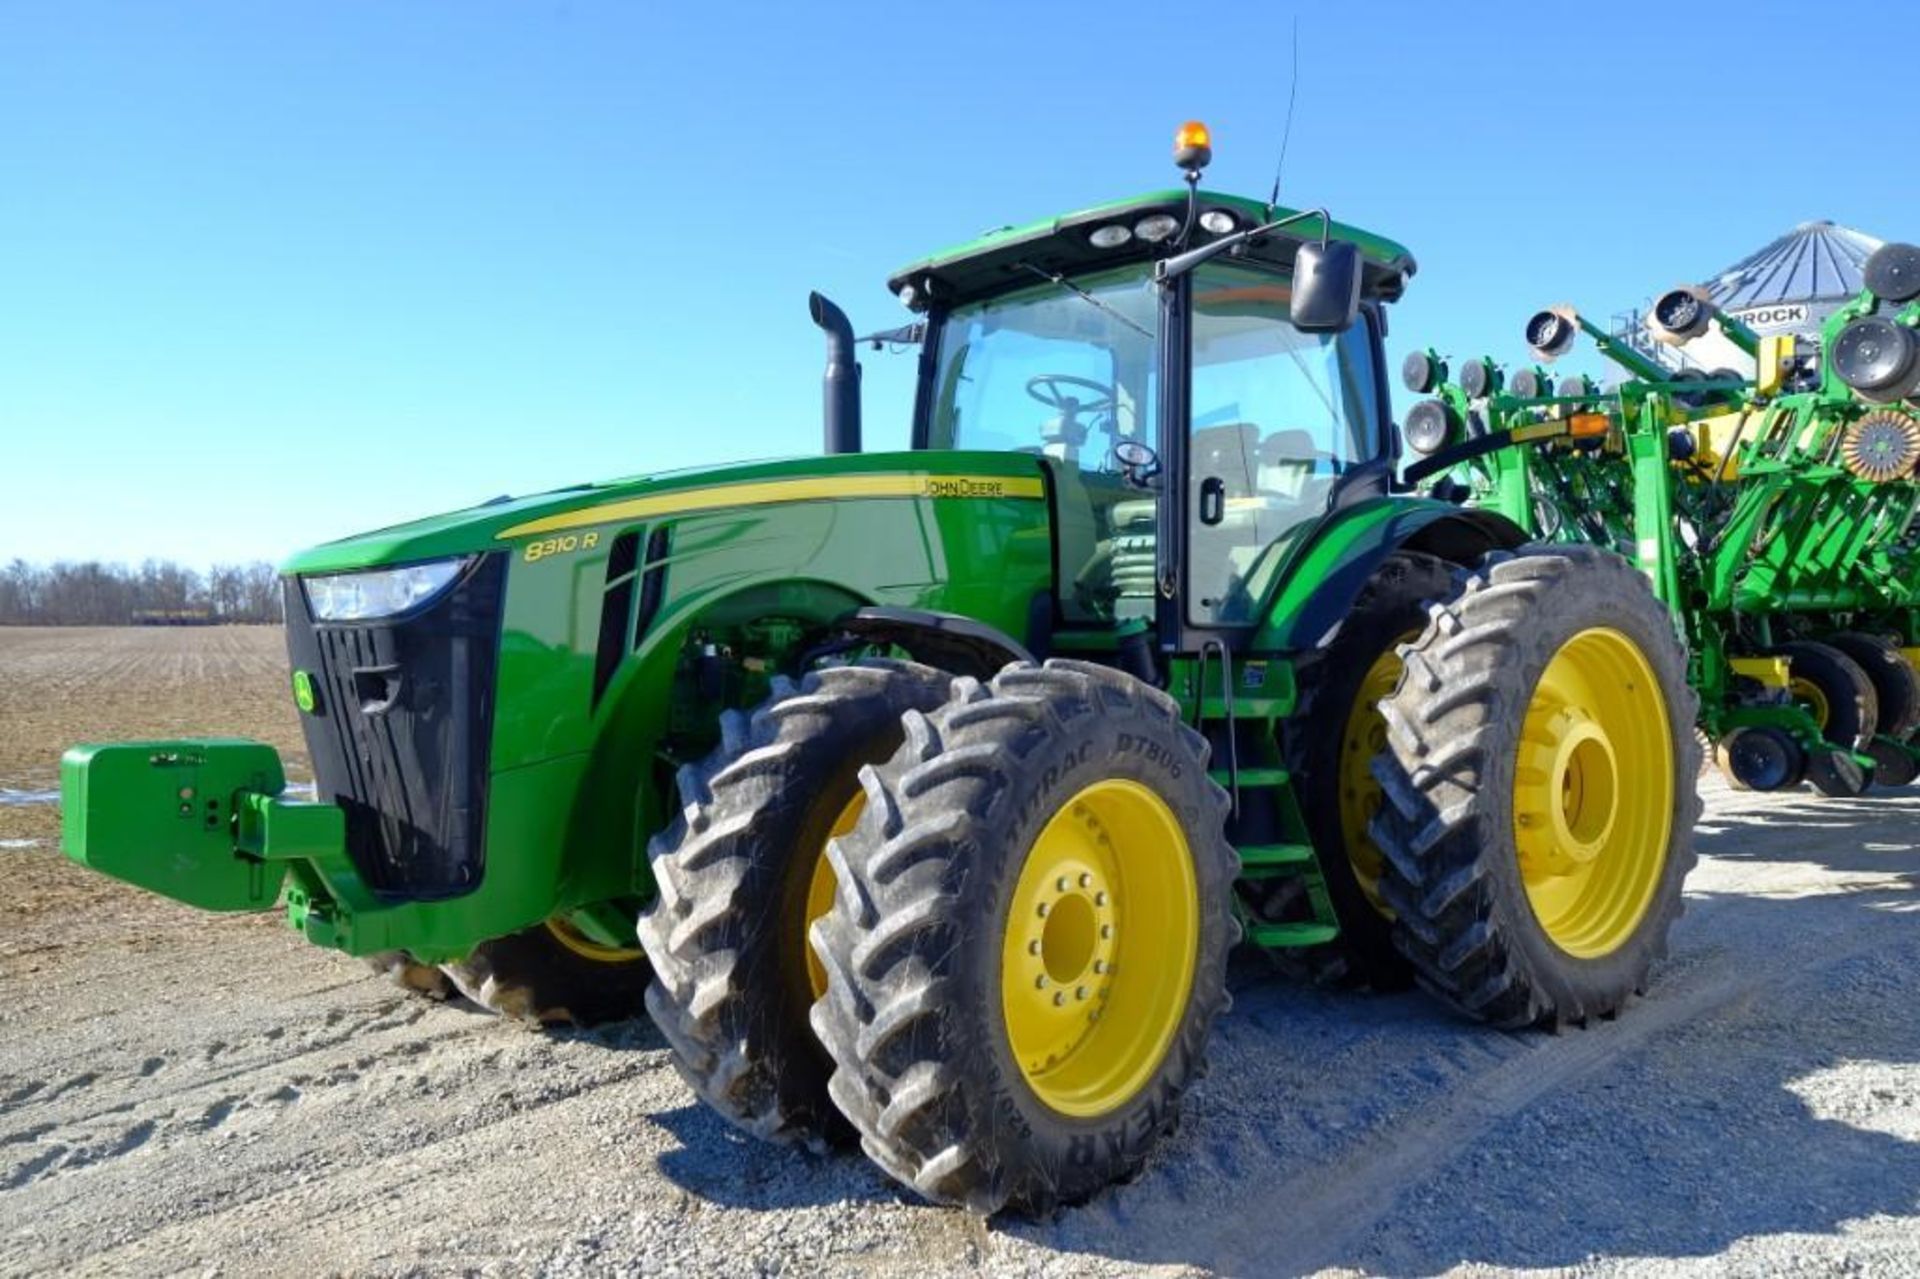 2011 JD 8310R Tractor - Image 10 of 17